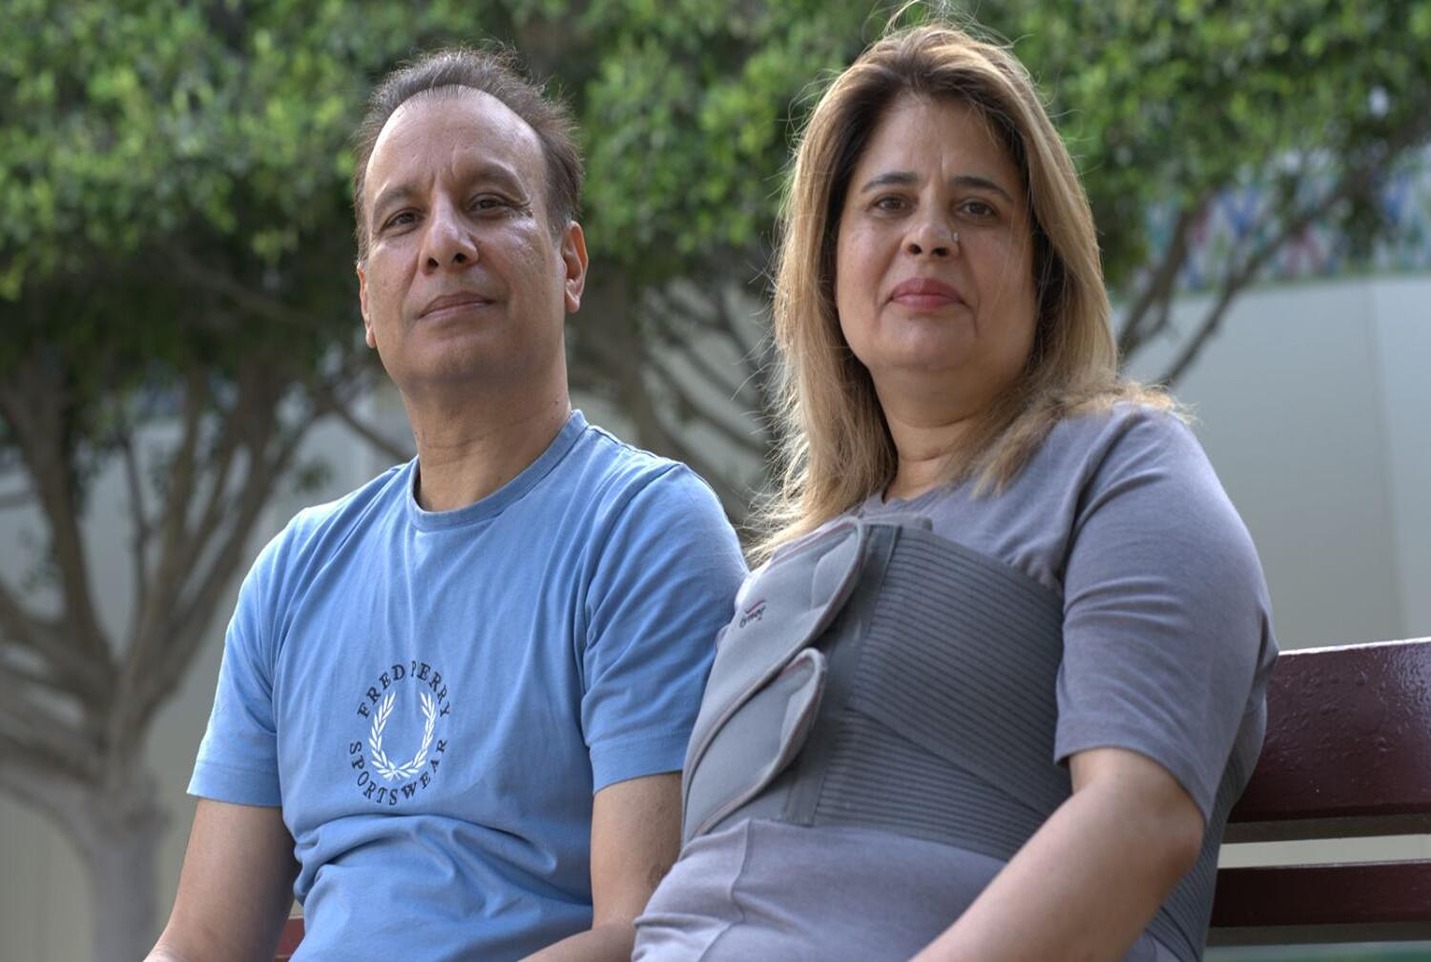 ‘Our lives changed completely’: UAE couple undergo heart surgeries 2 days apart